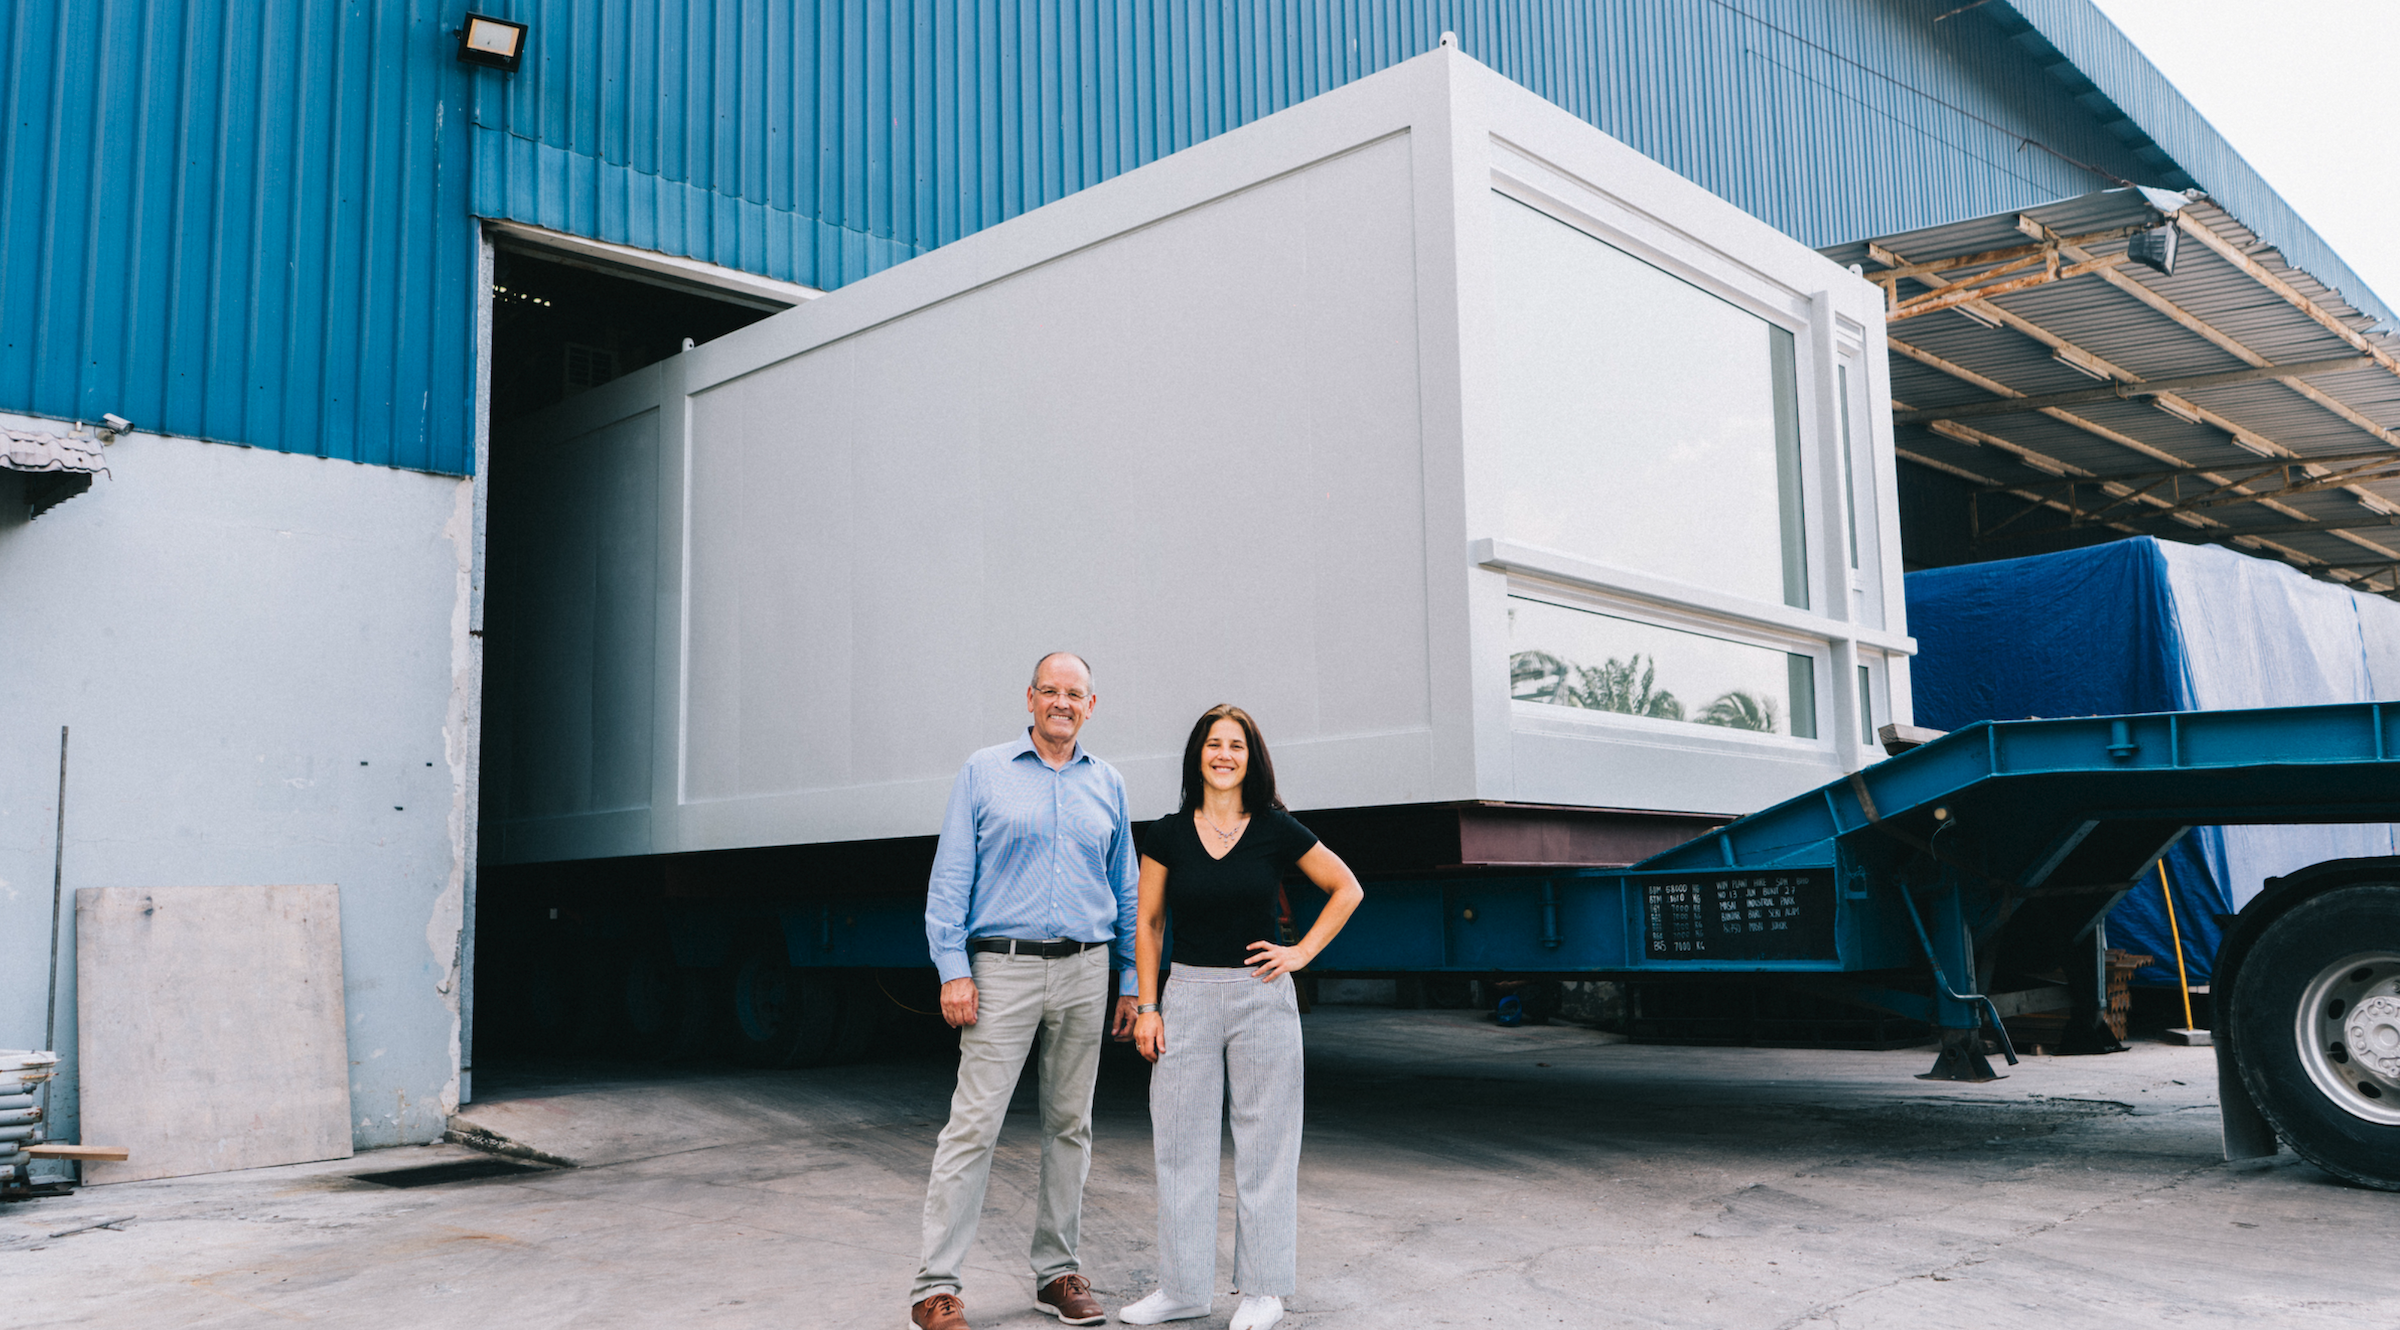 Multifamily construction startup Cassette takes a different approach to modular building